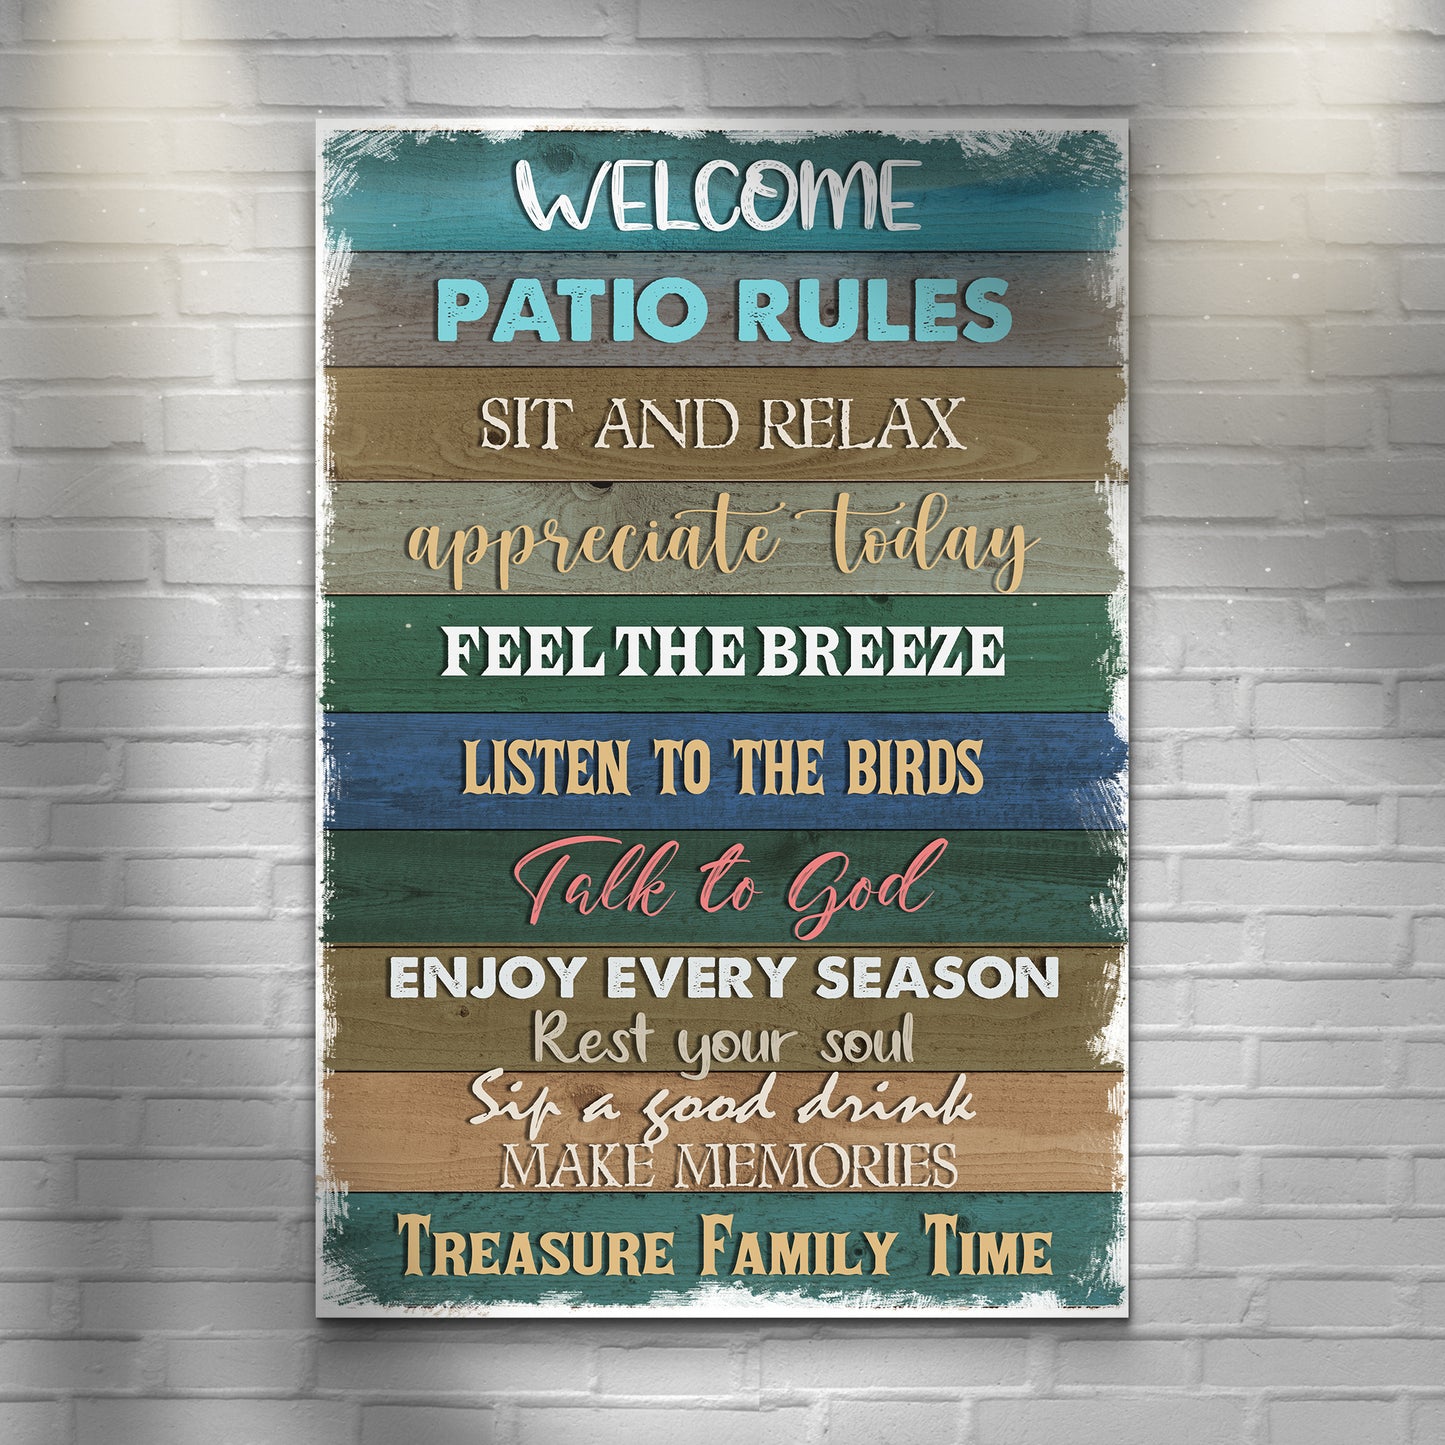 Patio Rules Sign - Image by Tailored Canvases